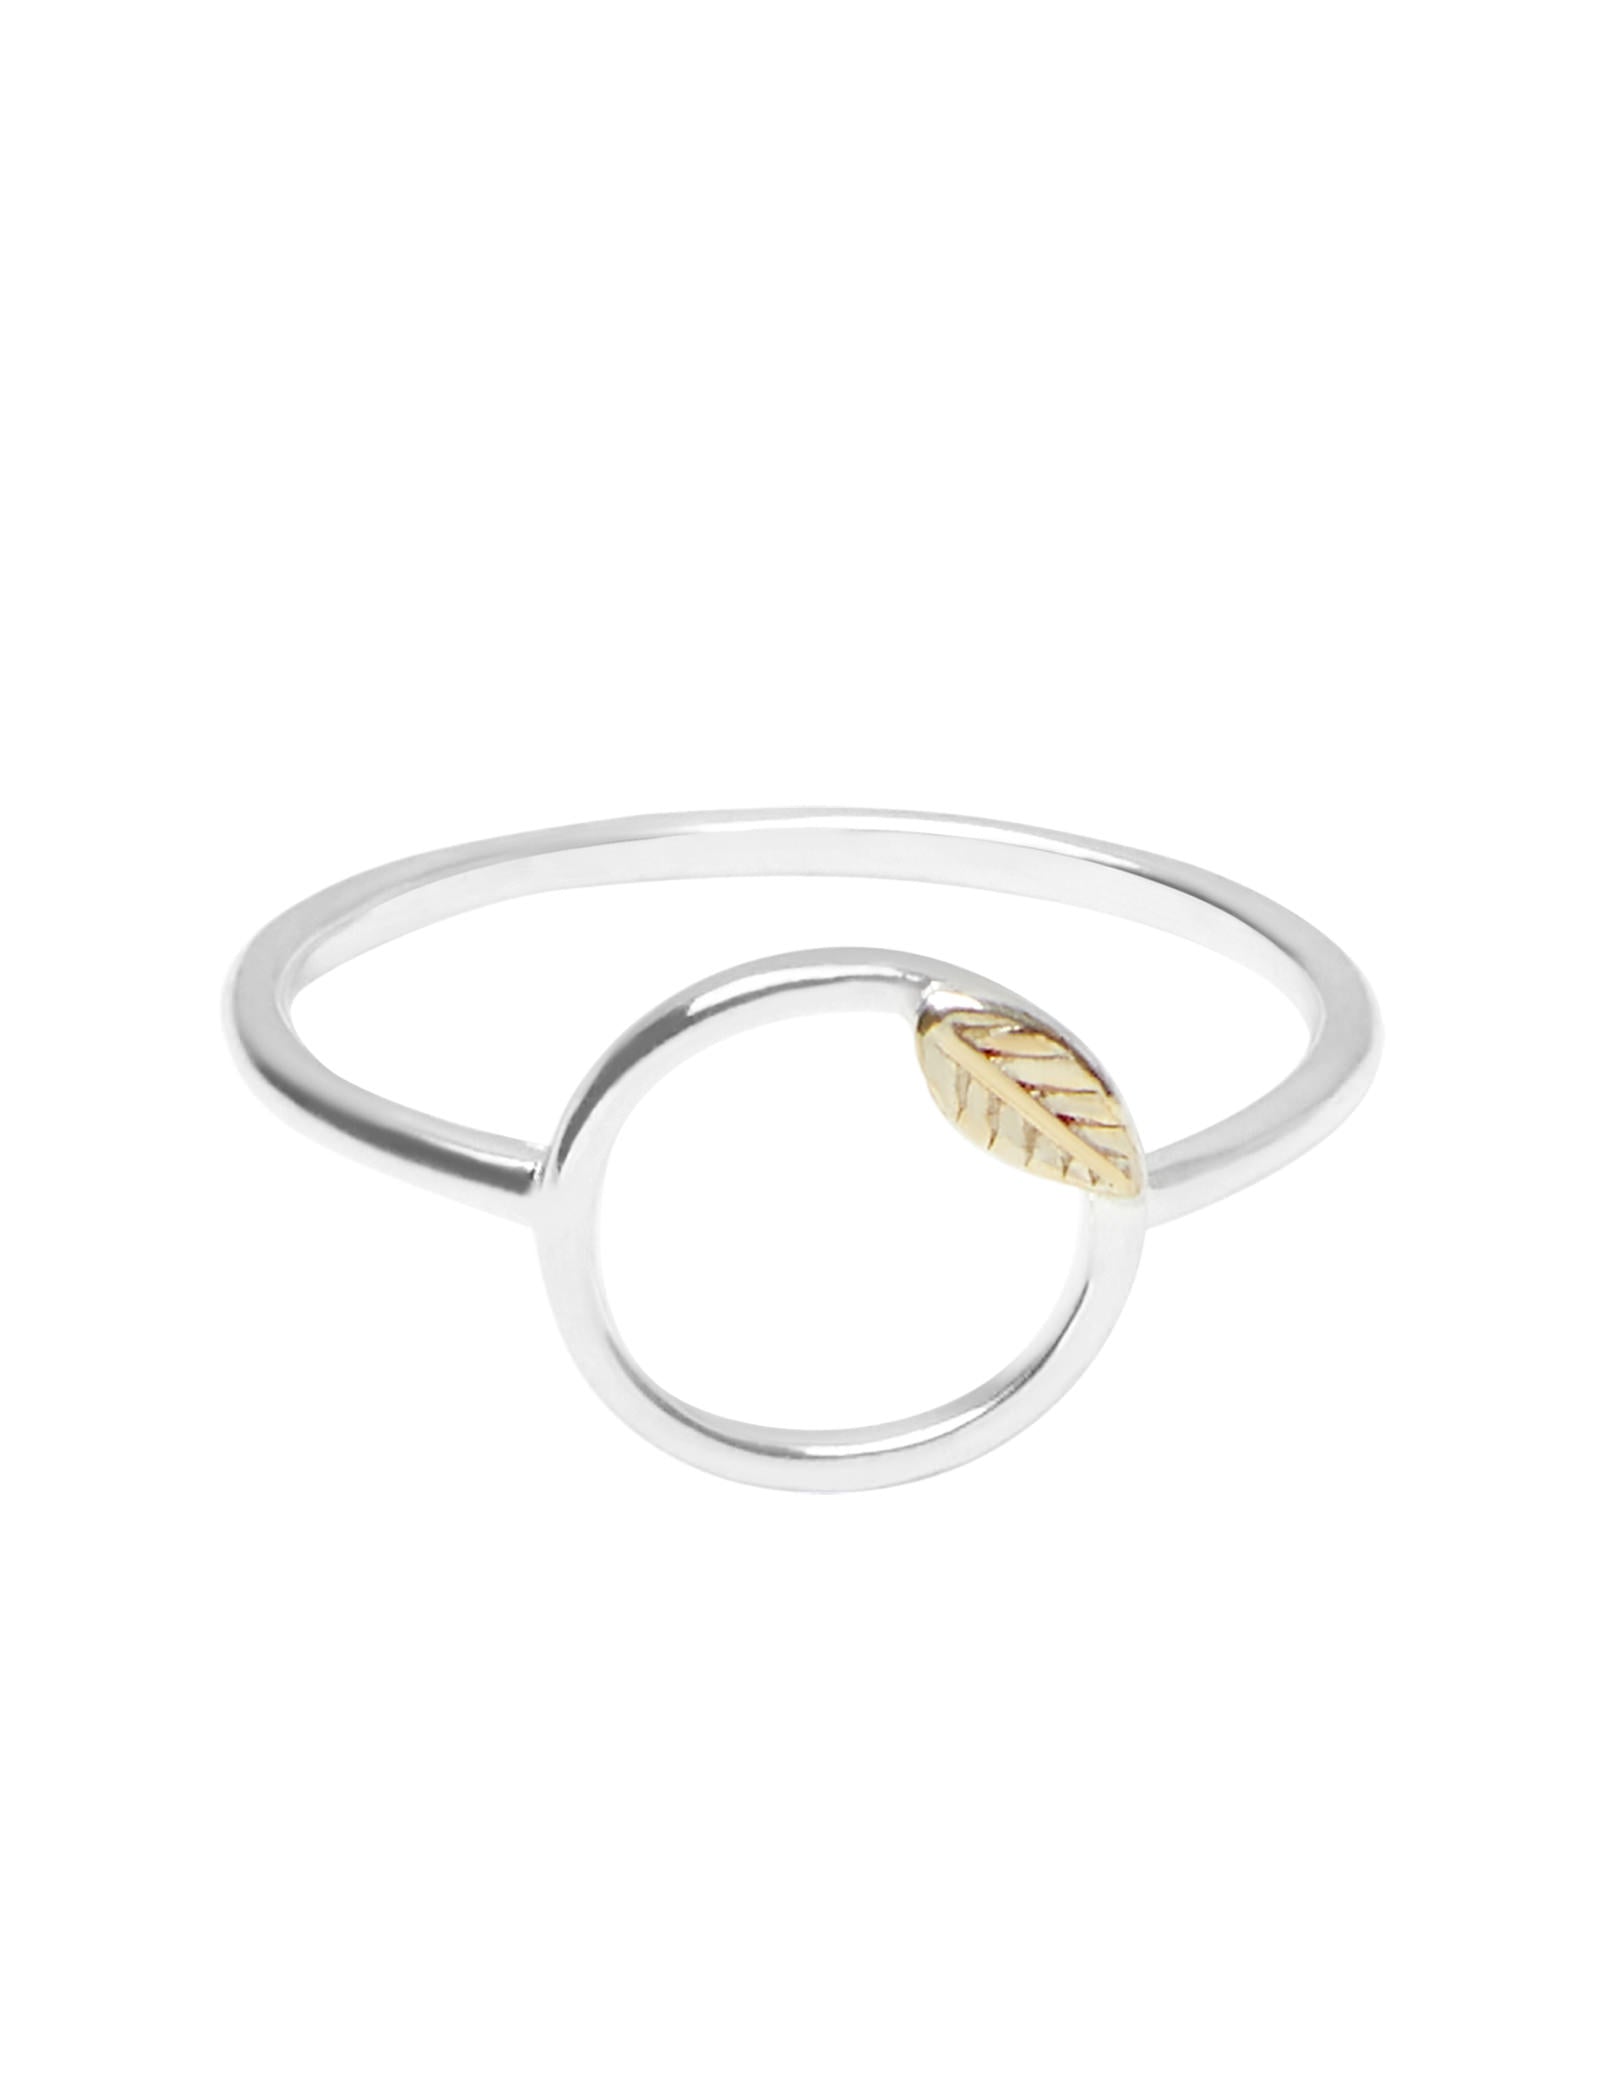 Pastiche  Spring Breeze Ring - R1218YG-N